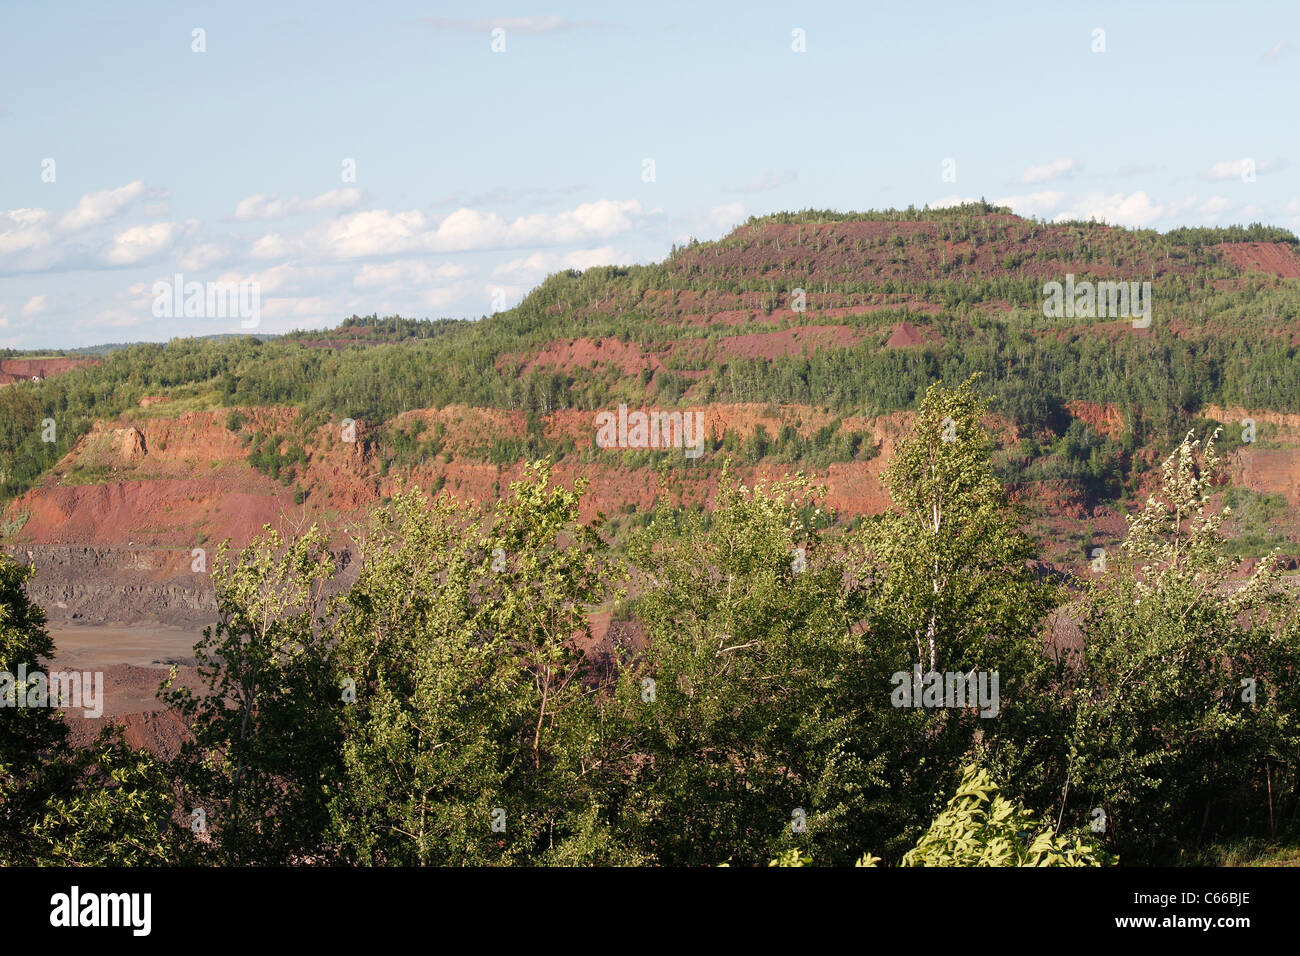 Hull–Rust–Mahoning Open Pit Iron Mine, older portion of mine showing vegetation regrowth Stock Photo